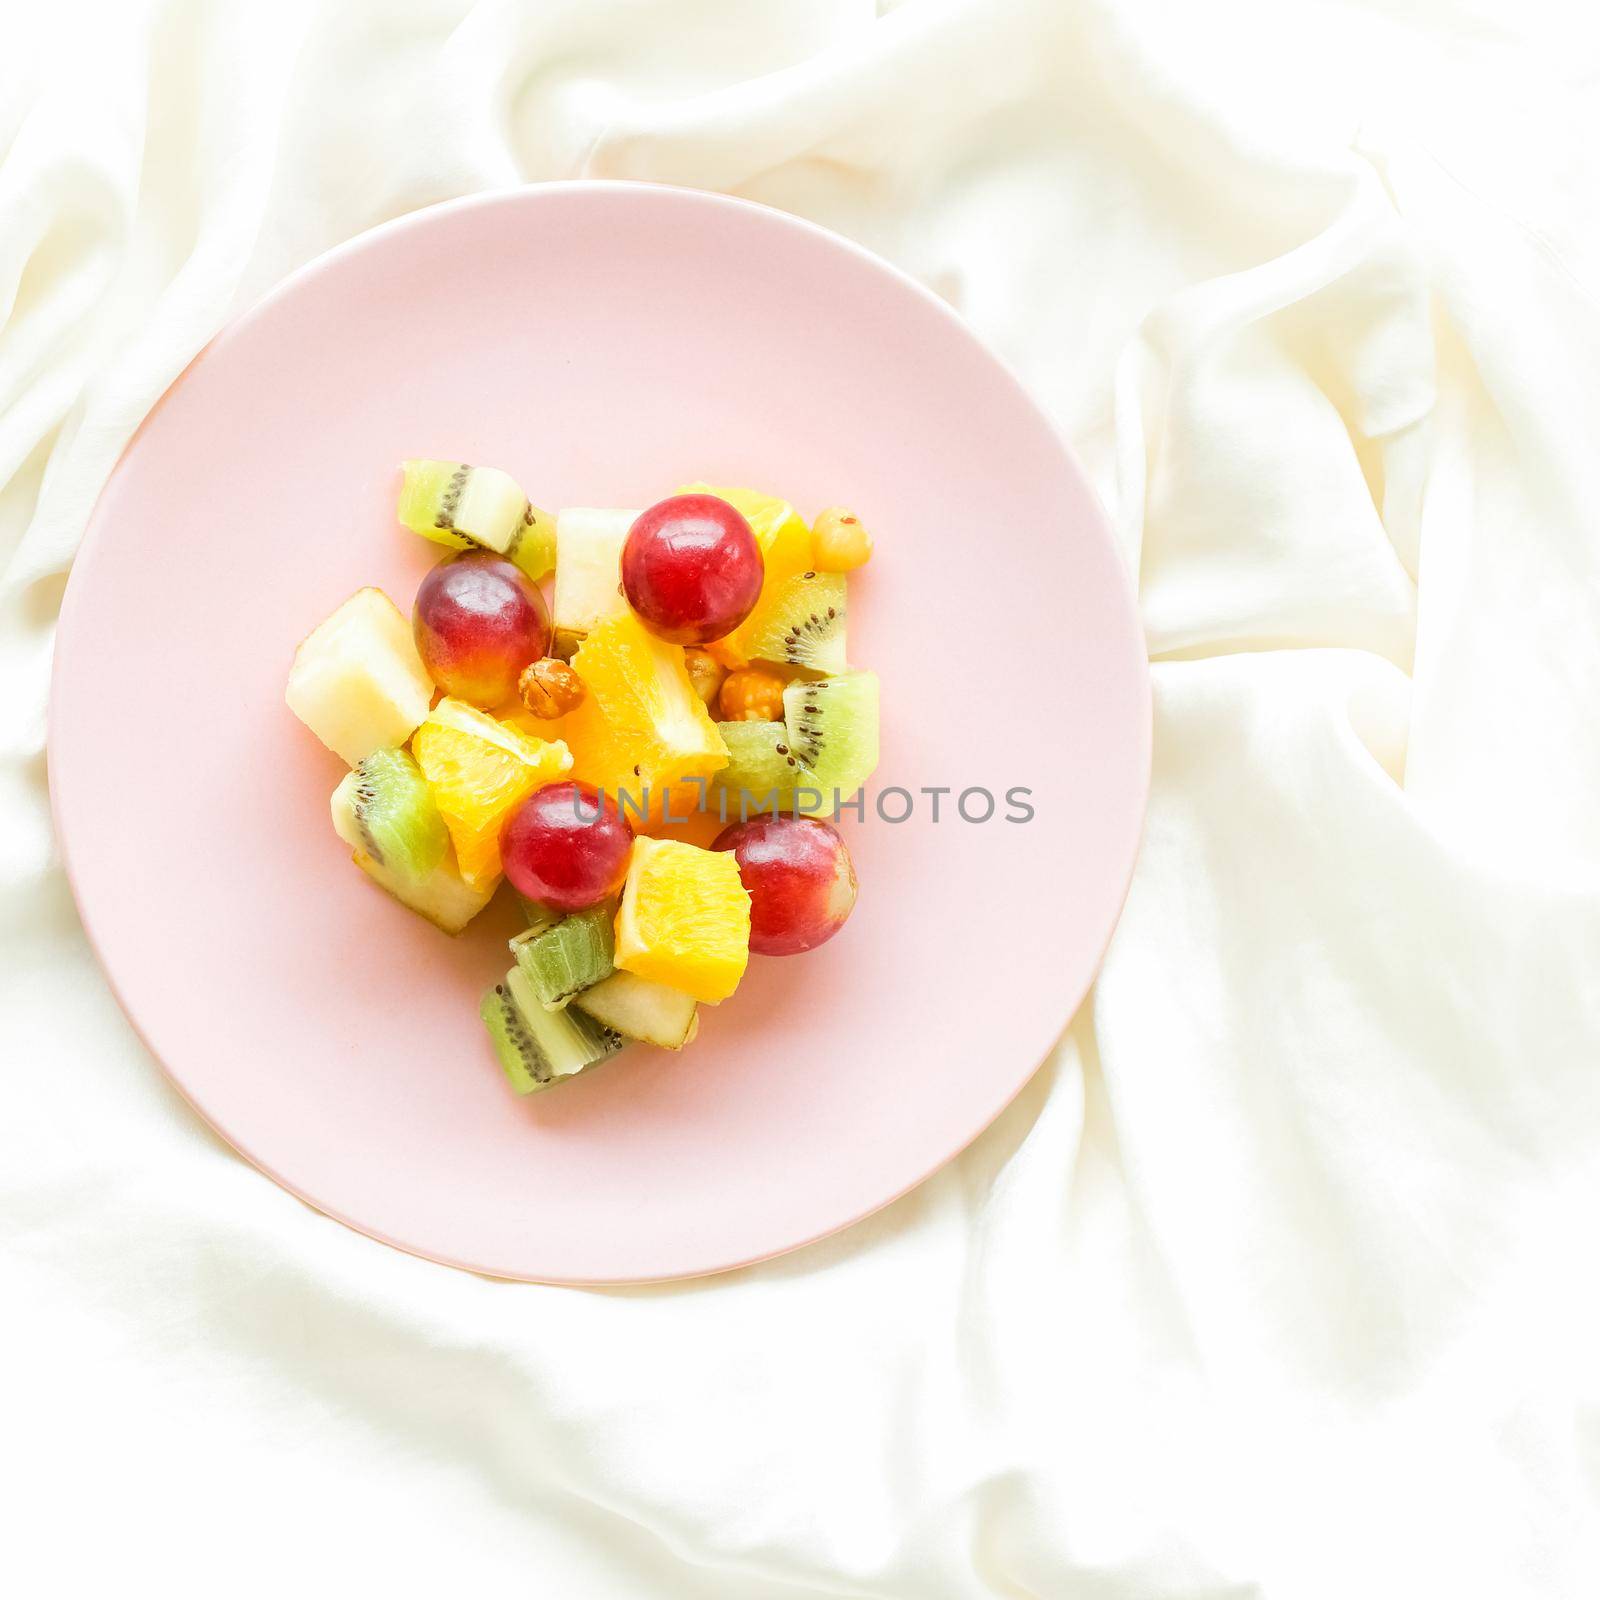 juicy fruit salad on silk, flatlay - healthy lifestyle and breakfast in bed concept by Anneleven